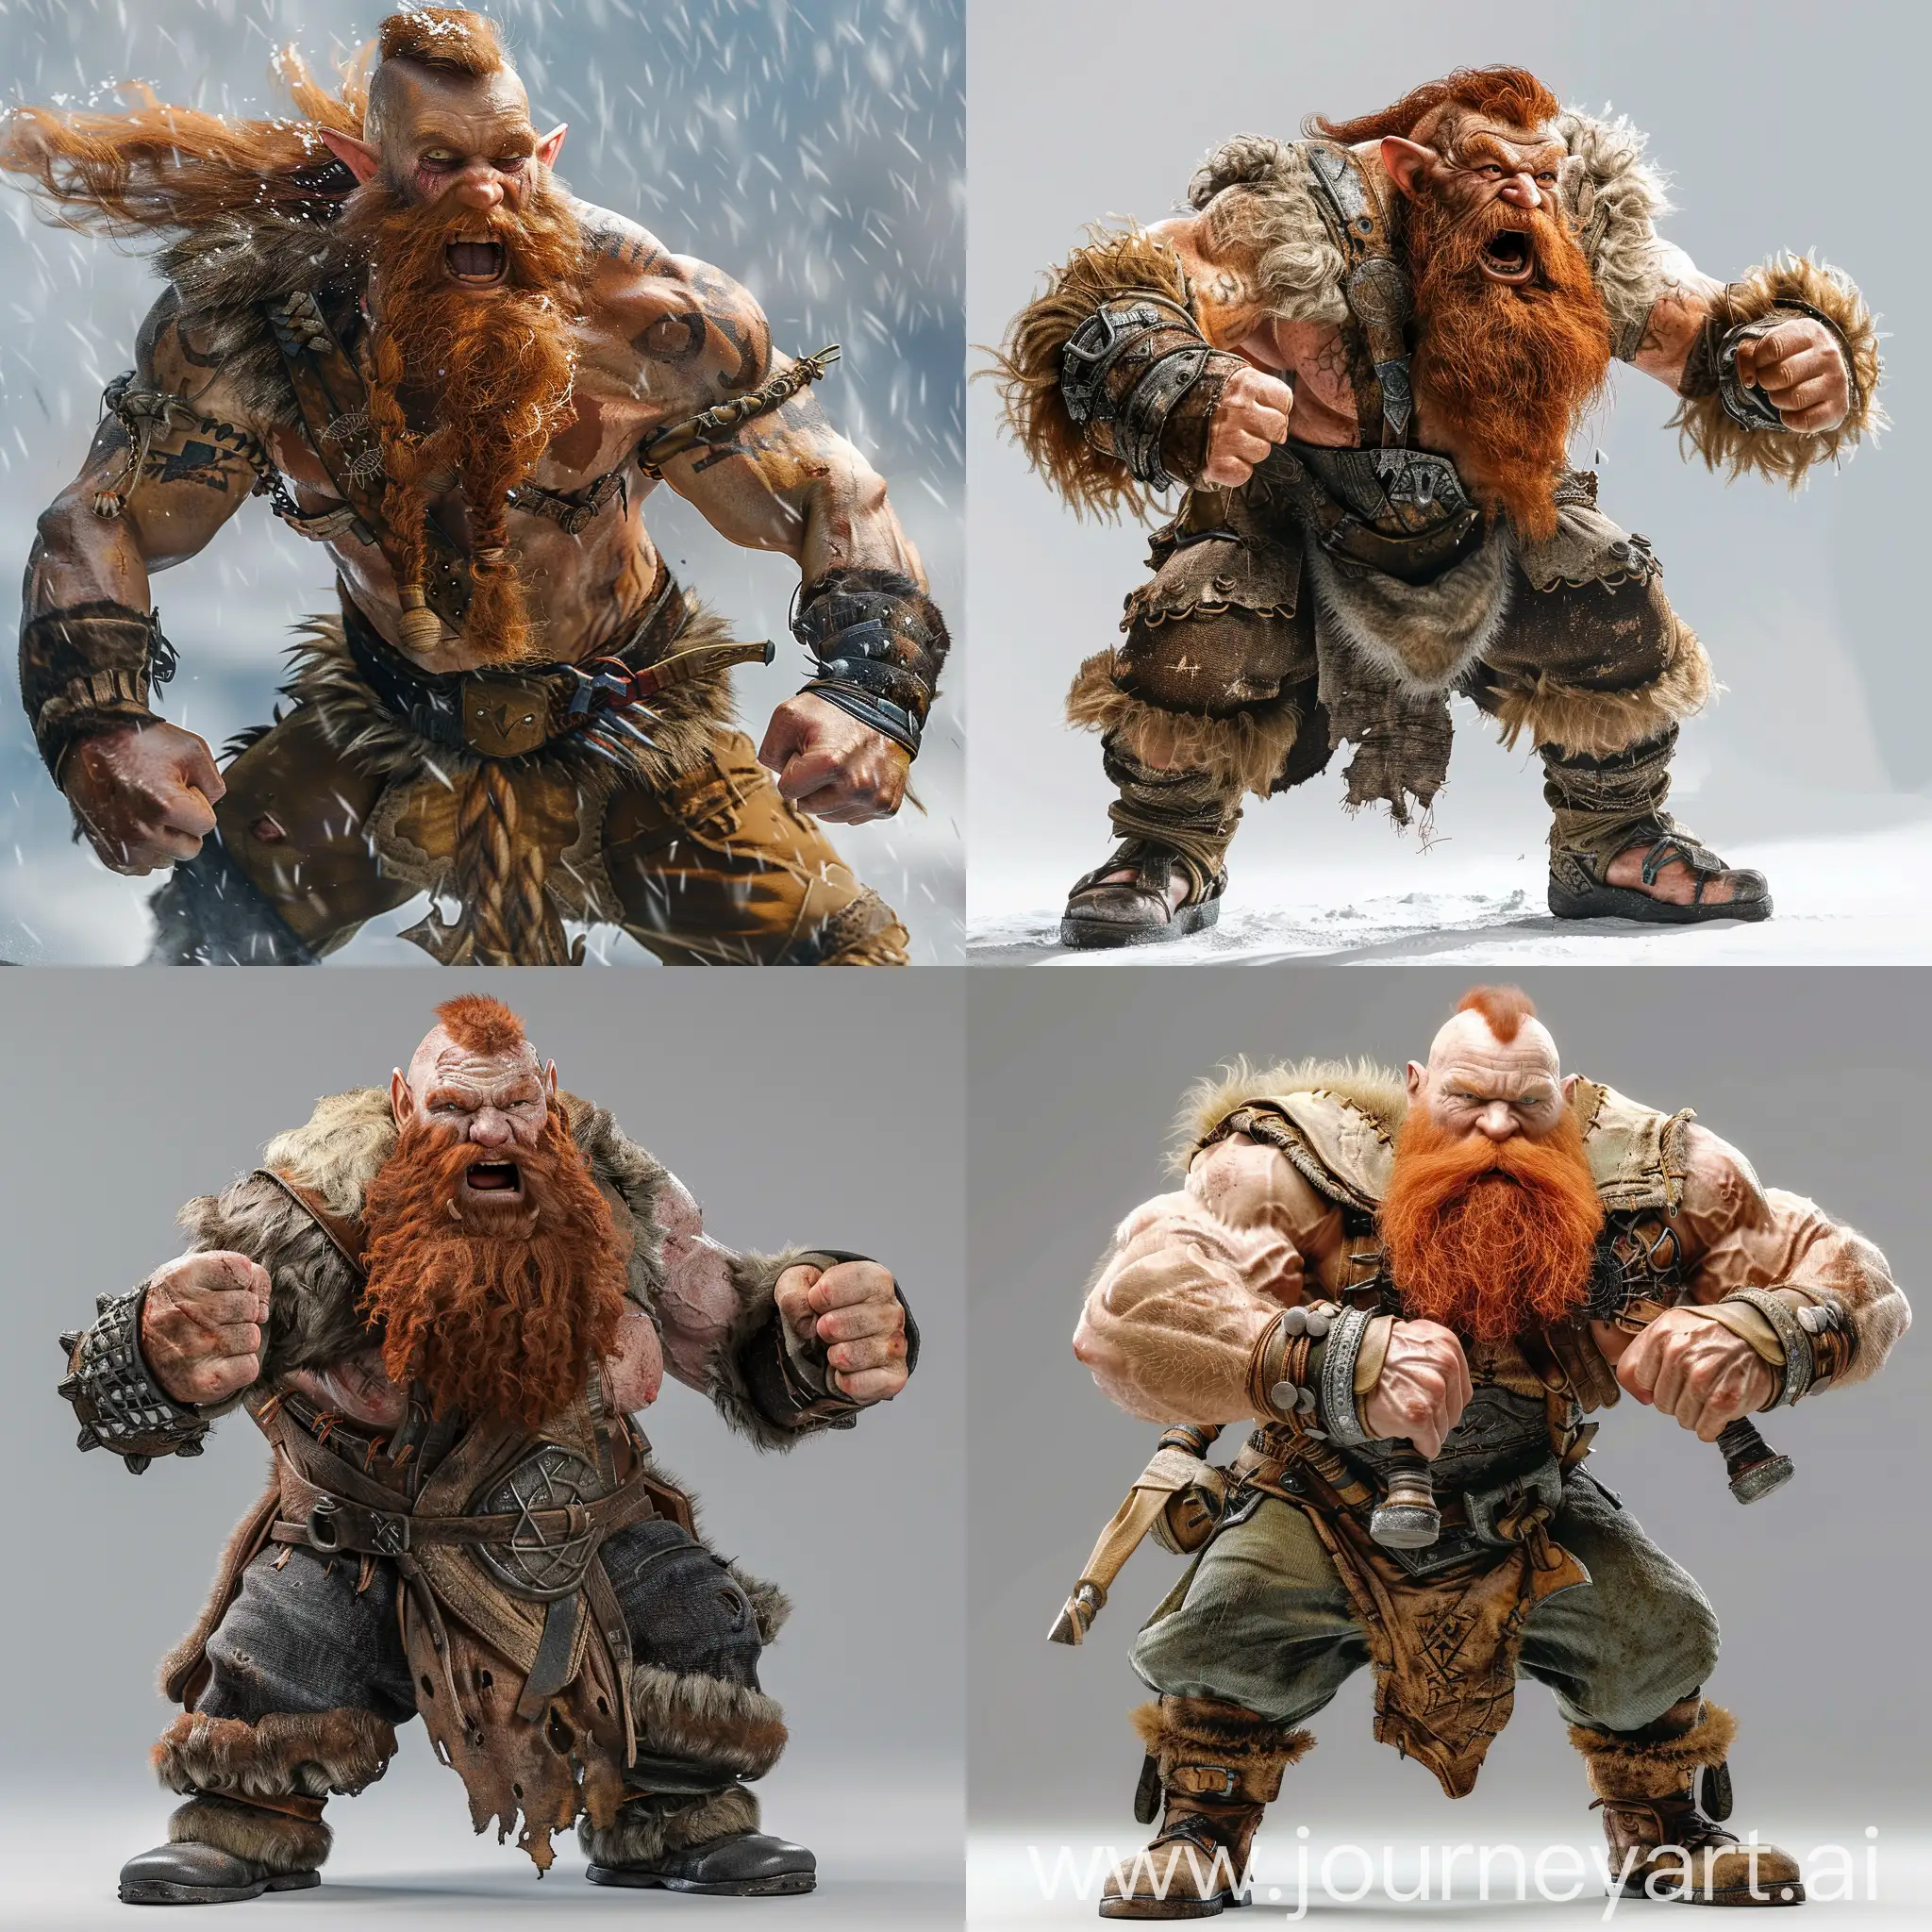 I'd like a photo realistic picture of a mountain dwarf barbarian. He's wearing the outfit from the movie Zardoz and ready to fight. He has a big red beard.